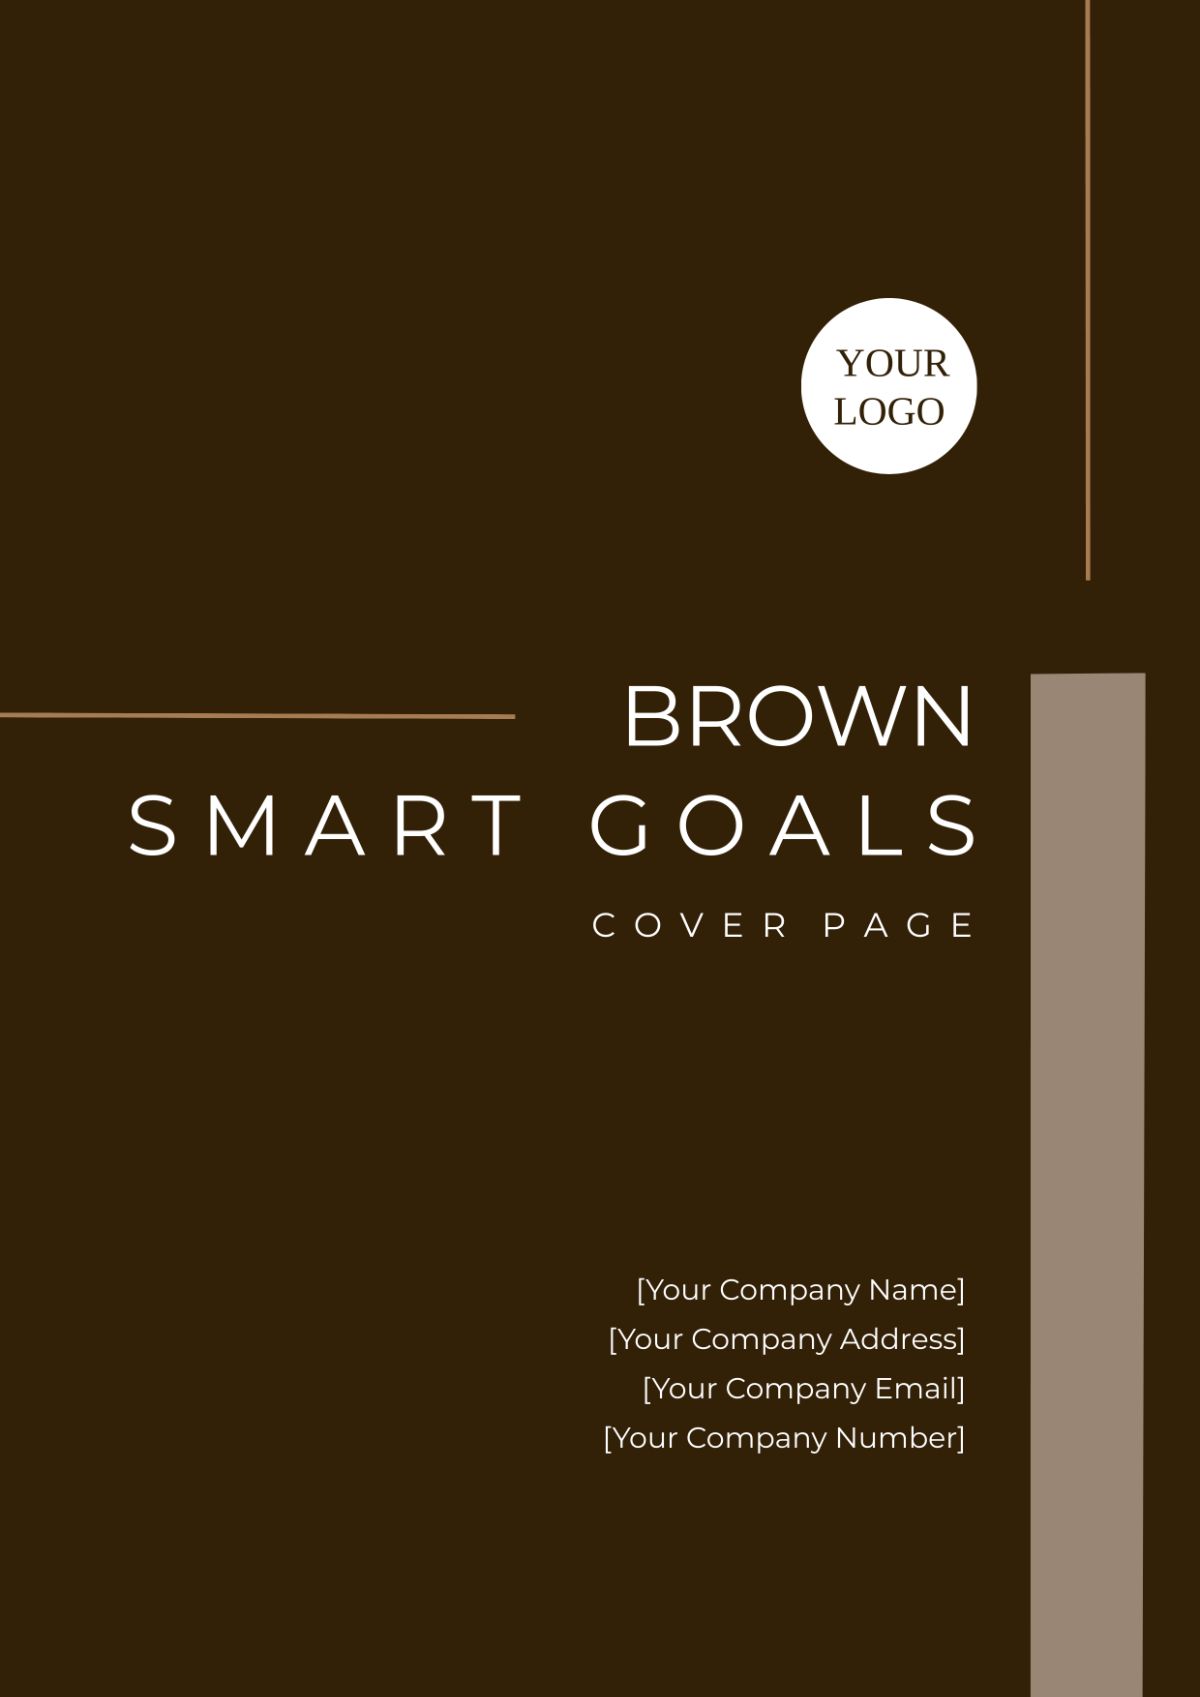 Brown SMART Goals Cover Page